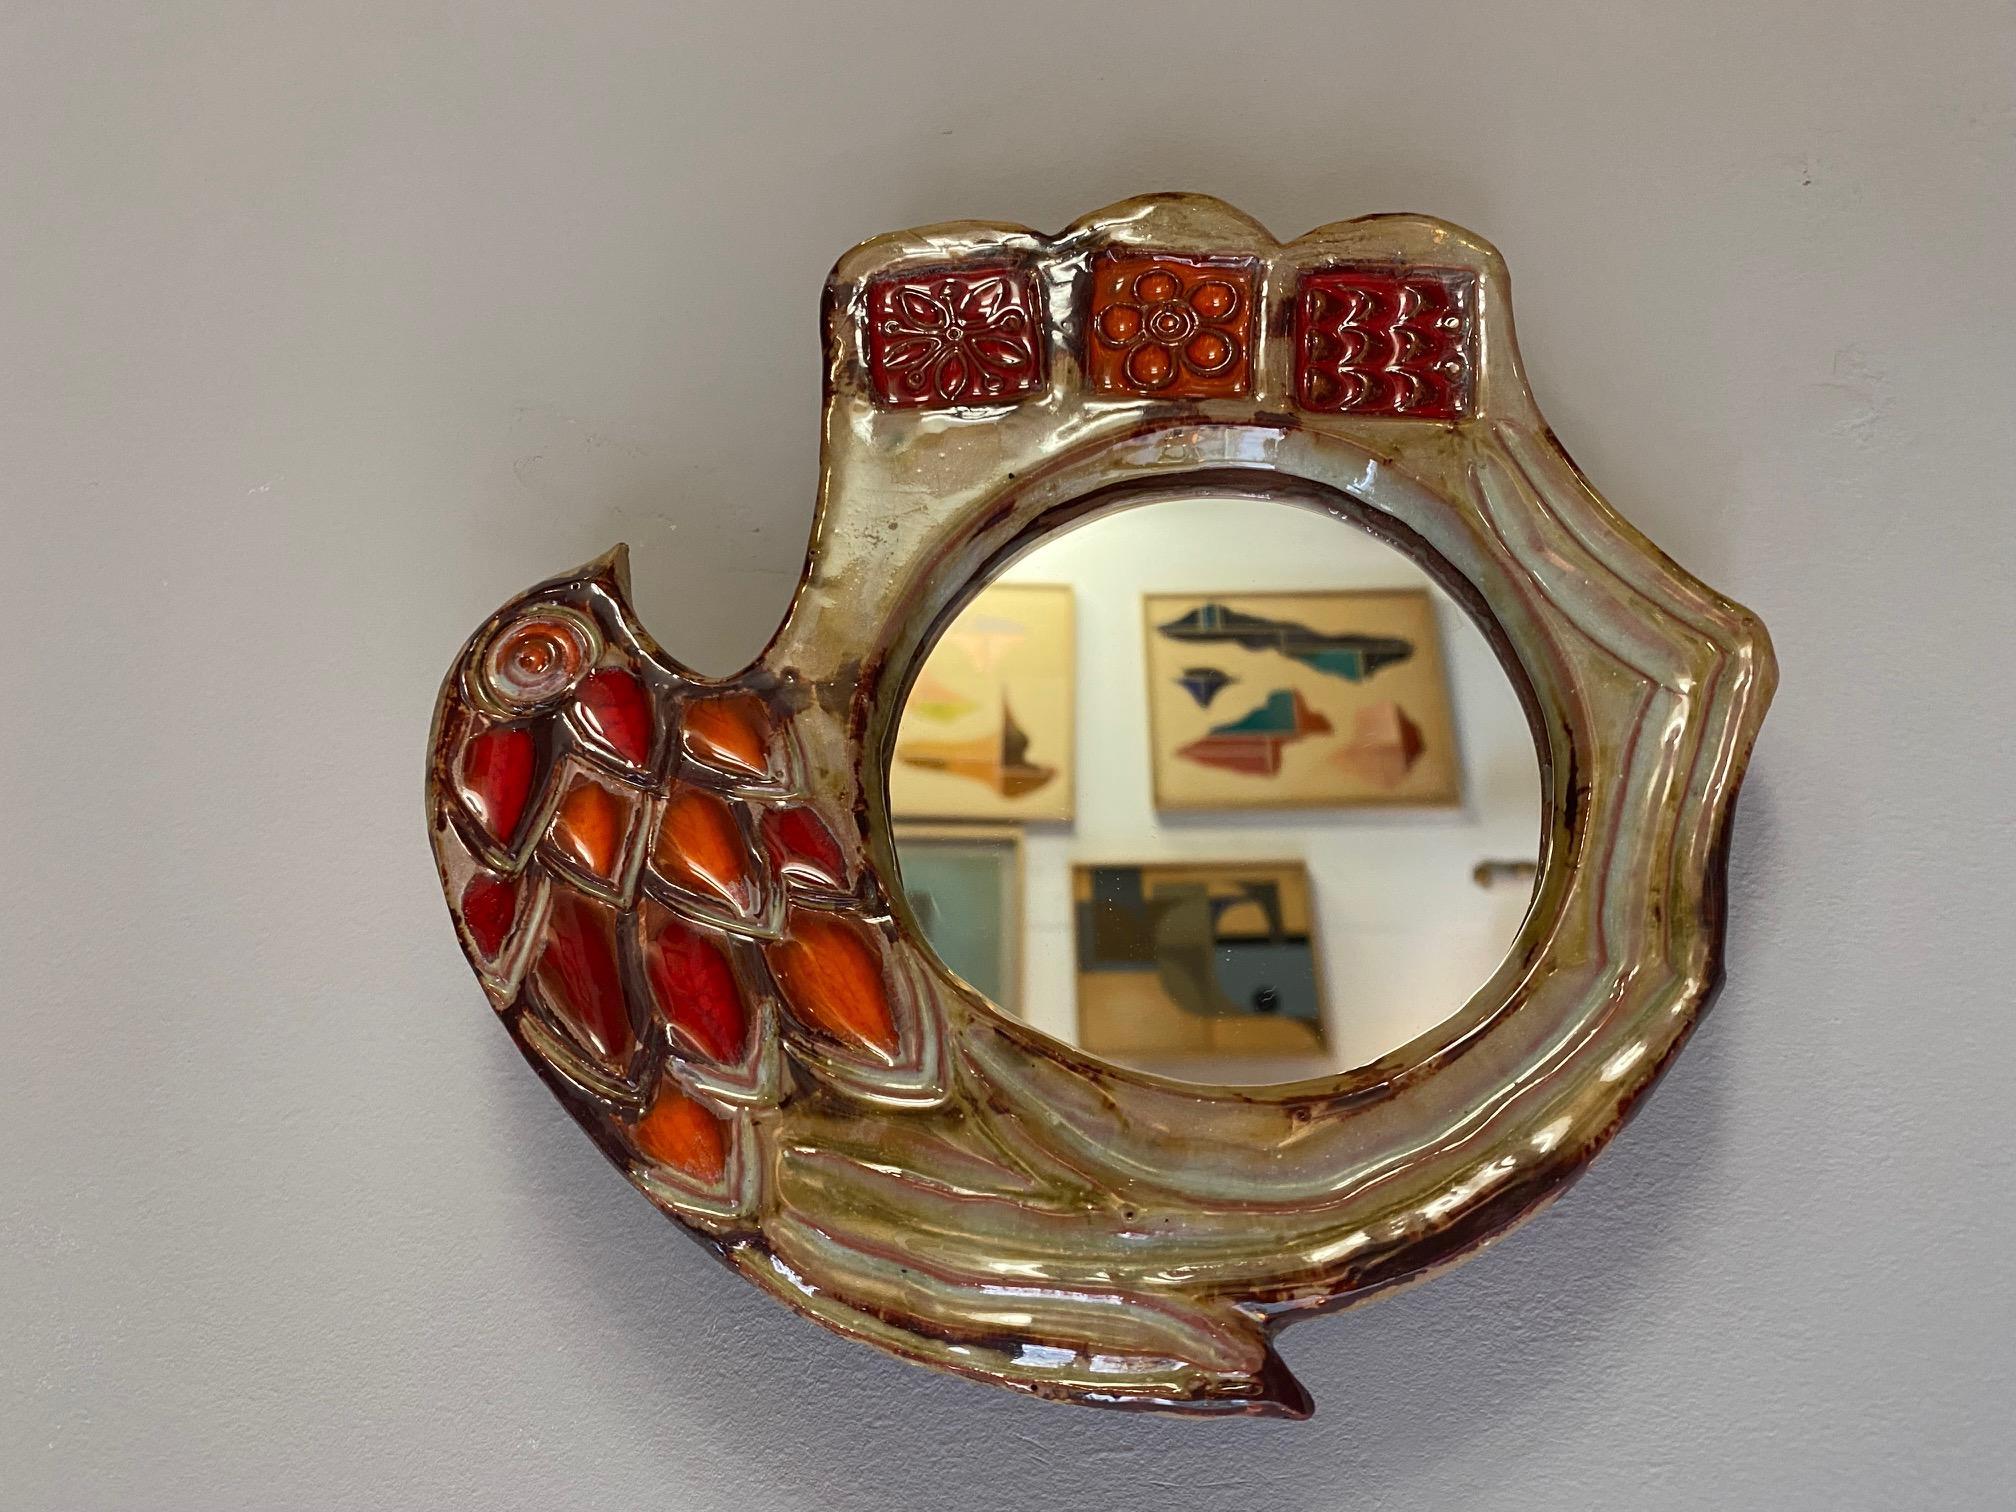 Ceramic Mirror by Henri Siffre, France, 1970s
Active in Montpellier, south of France, during the 1970s and 1980s.